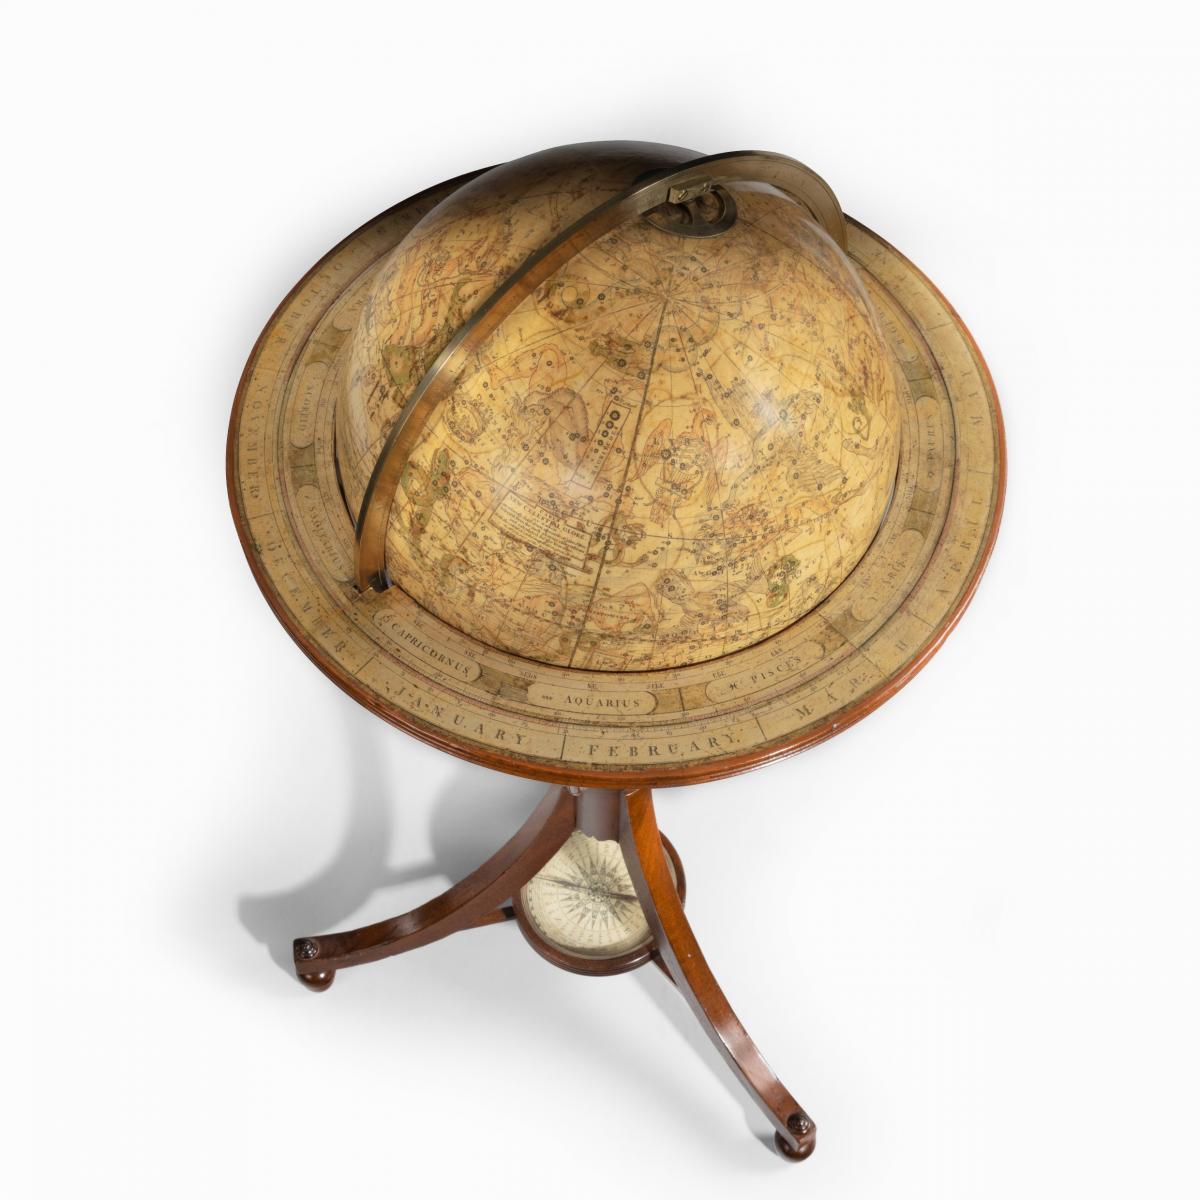 A pair of 12-inch floor globes by Cary